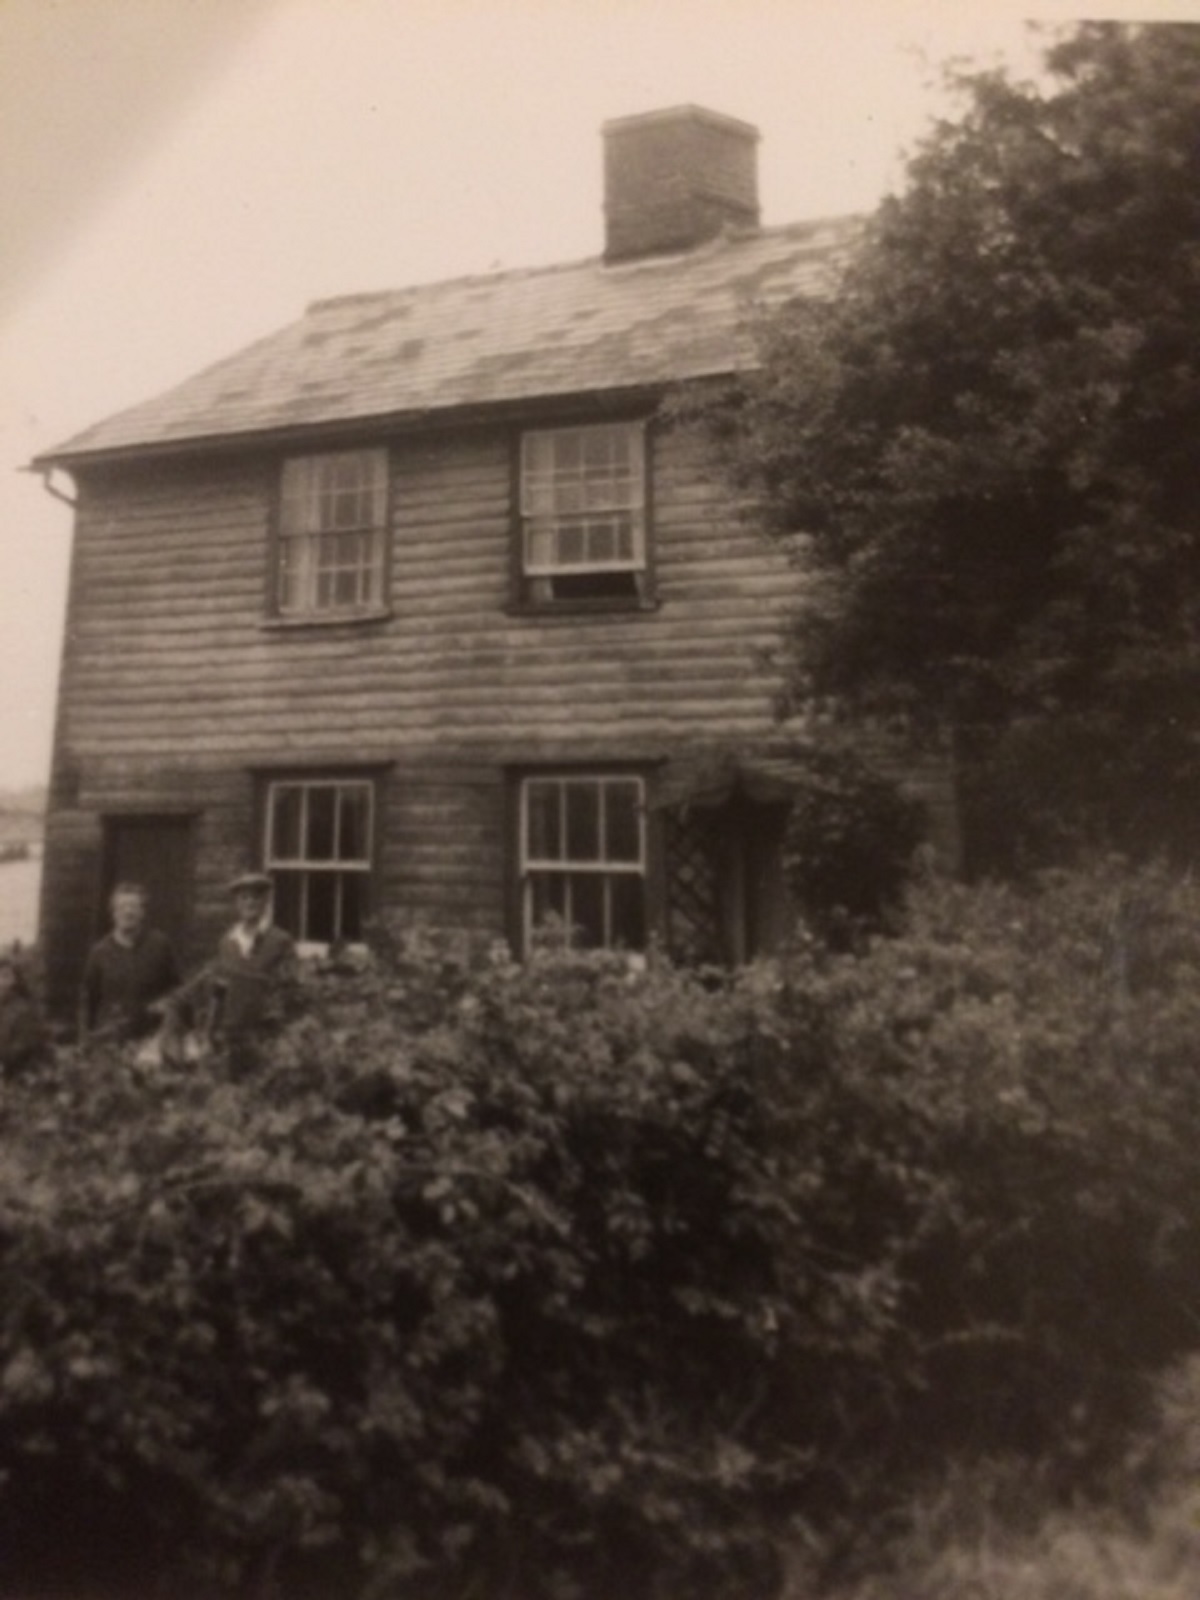 Home territory - Peakfield Cottage, in Ramsey, which was the home of Alfred Button in the 1950s